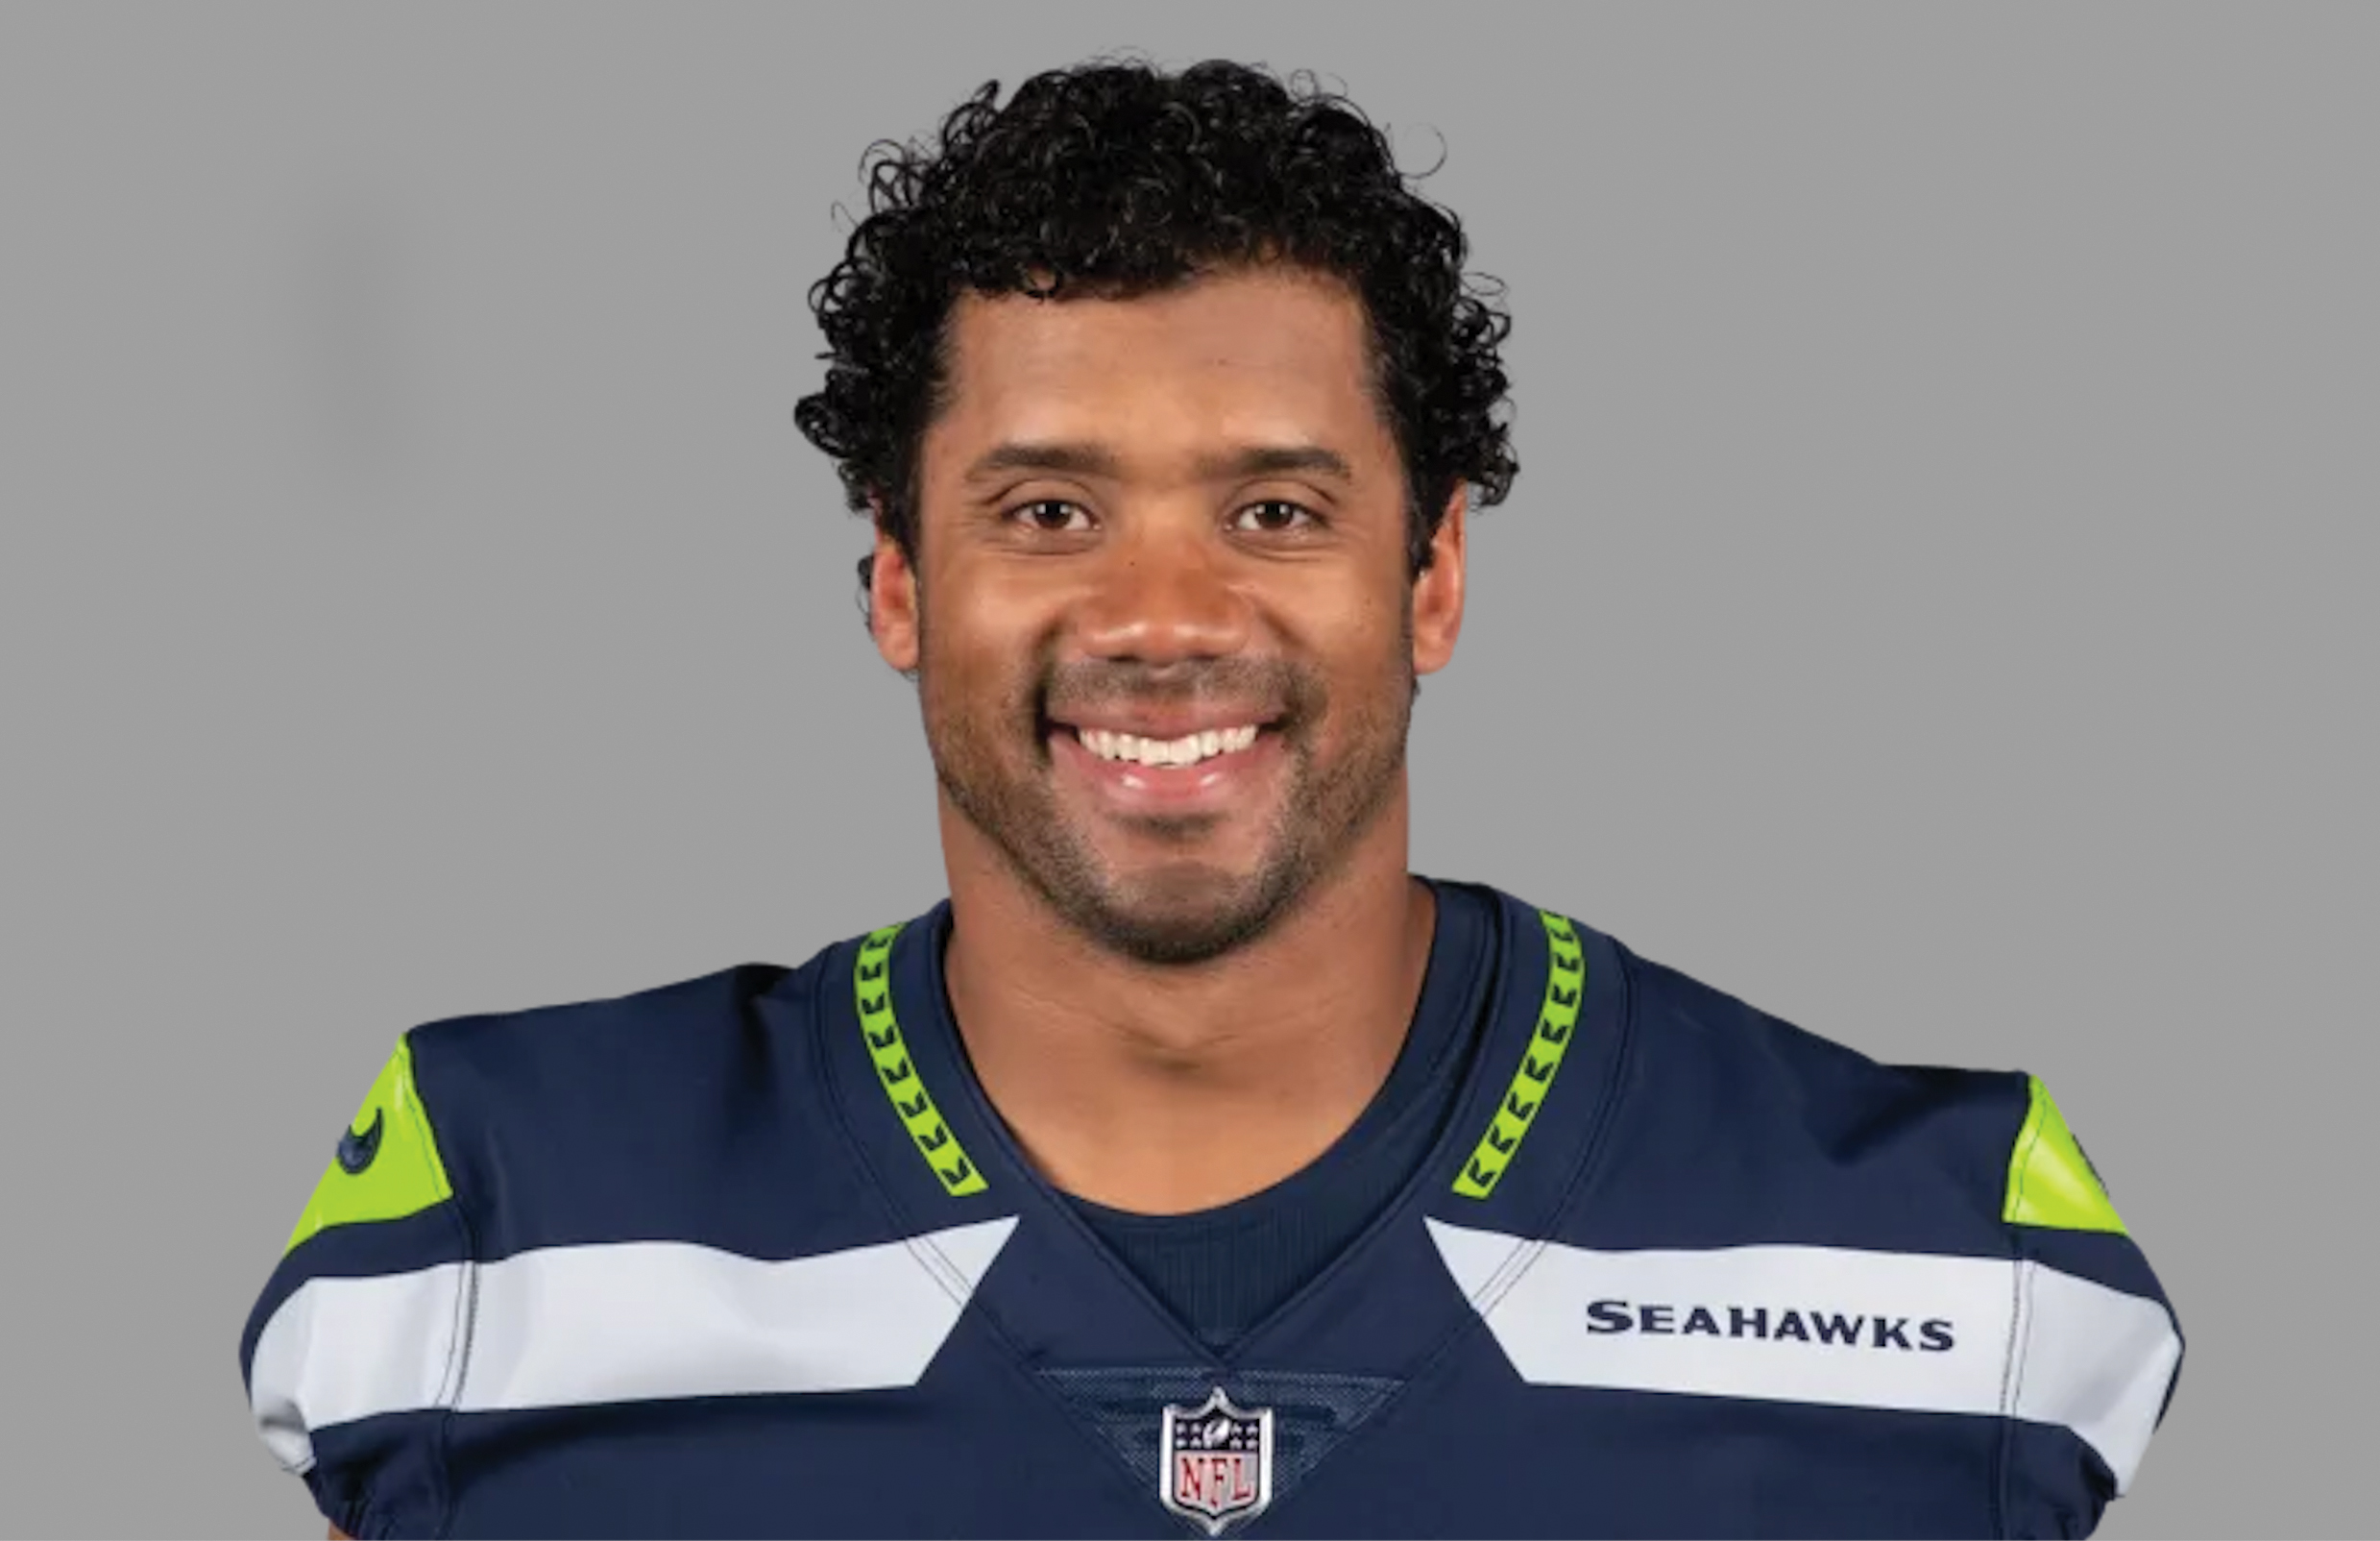 Russell Wilson Net Worth 2022: How much does Russell Wilson Make Per Year?